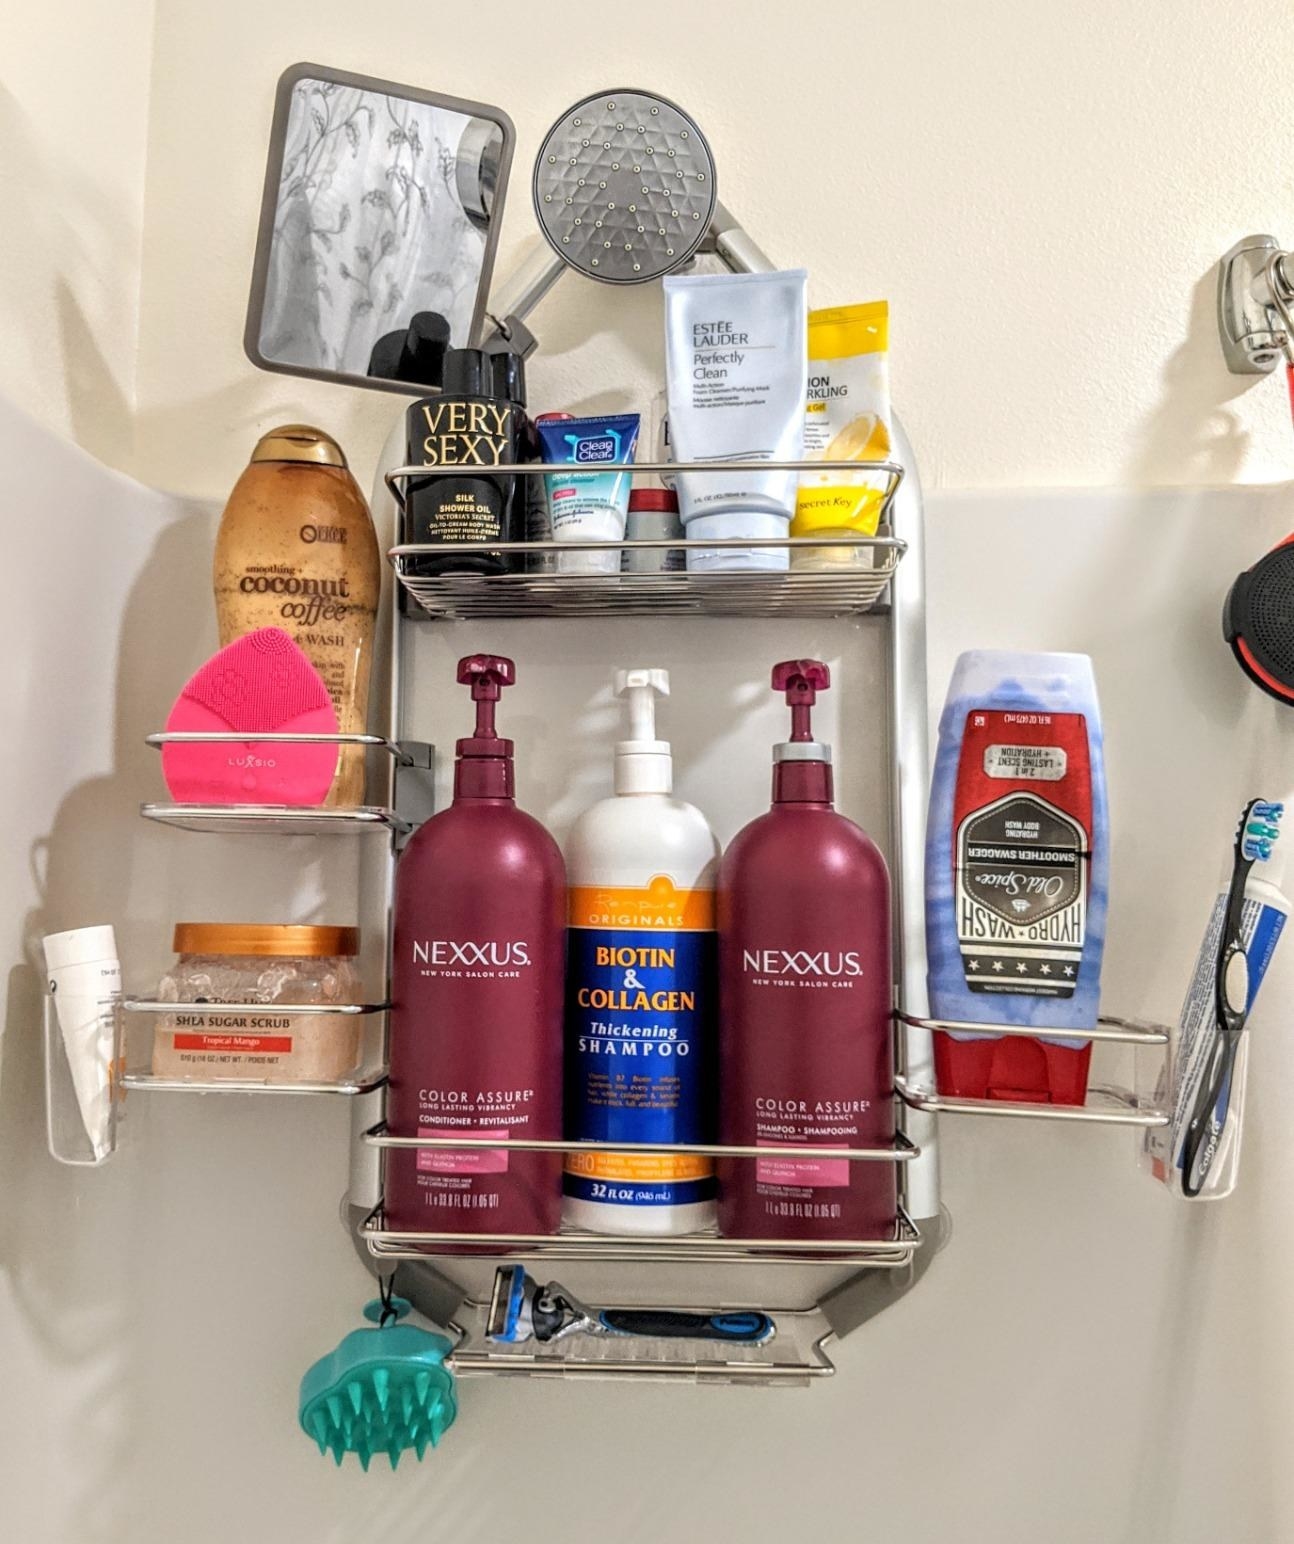 Reviewer photo of the shelf holding several bottles of shampoo, conditioner, body wash,  razors, a toothbrush, toothpaste, and more